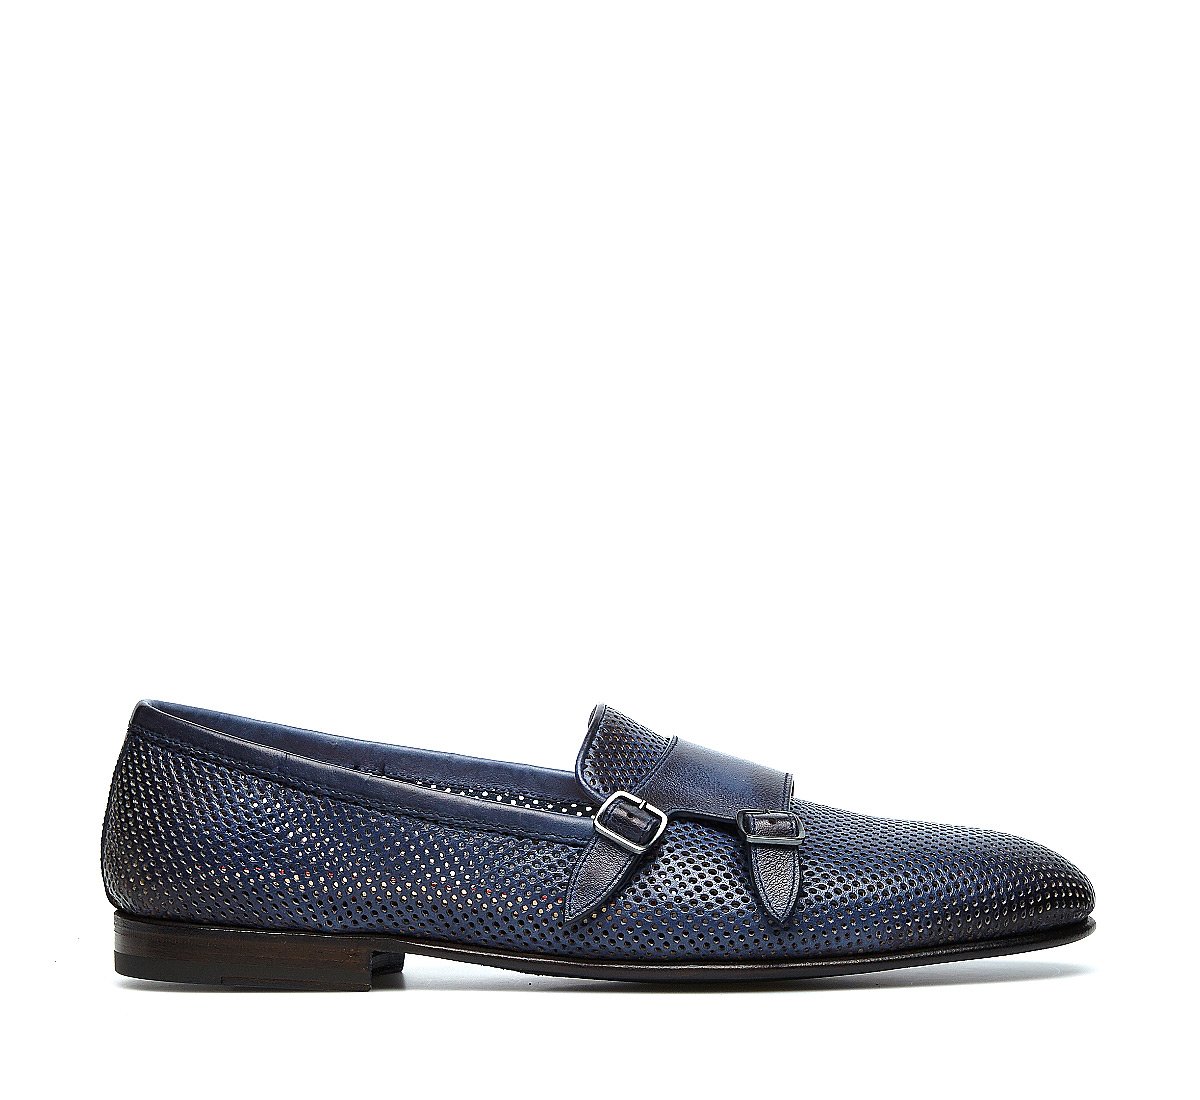 Double-buckle moccasins in exquisite calfskin, constructed using the Goodyear process